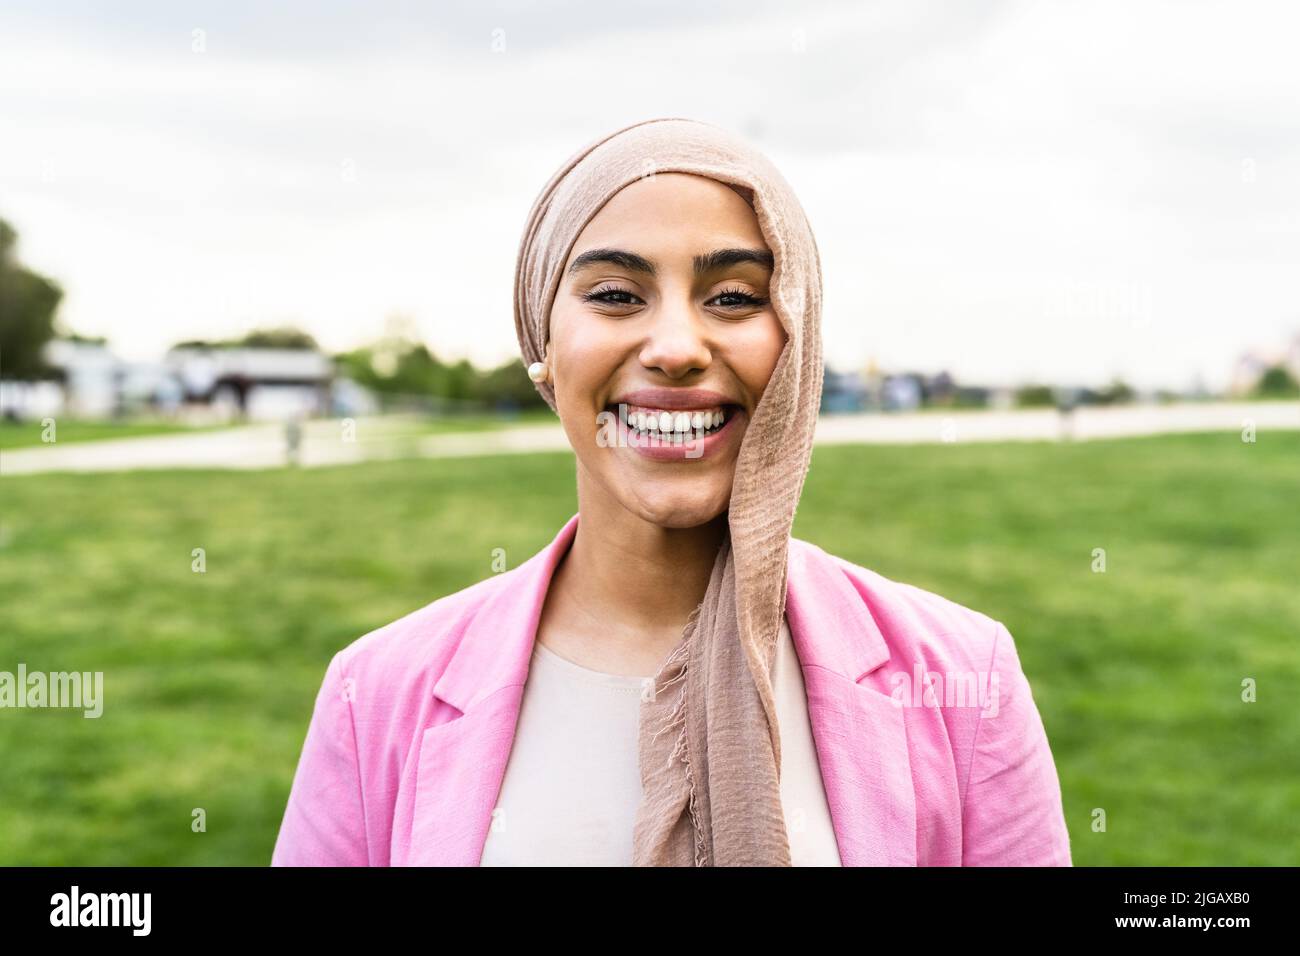 Happy Muslim woman having fun while posing in front of camera in a park Stock Photo